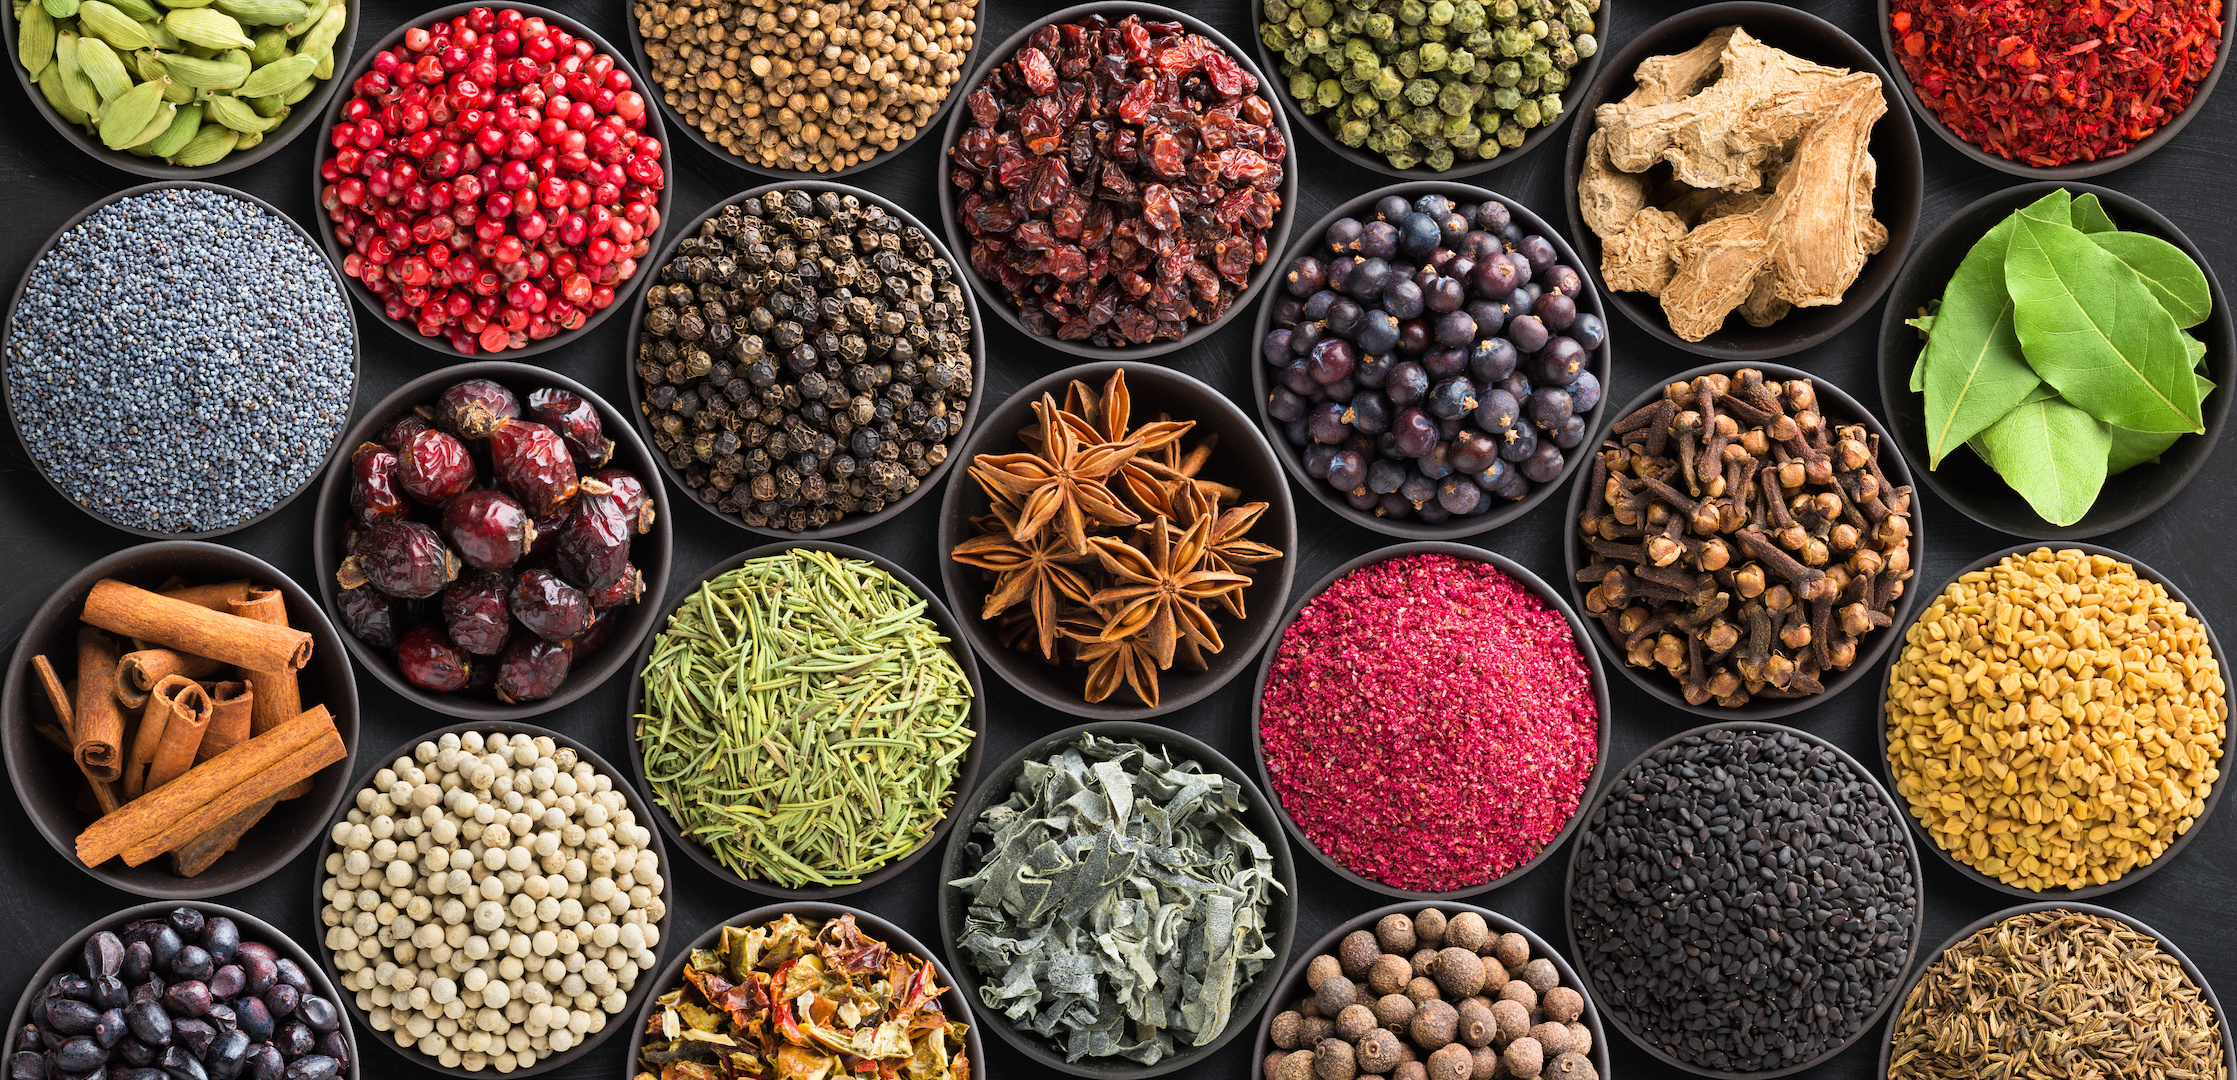 Image of various herbs and spices in bowls